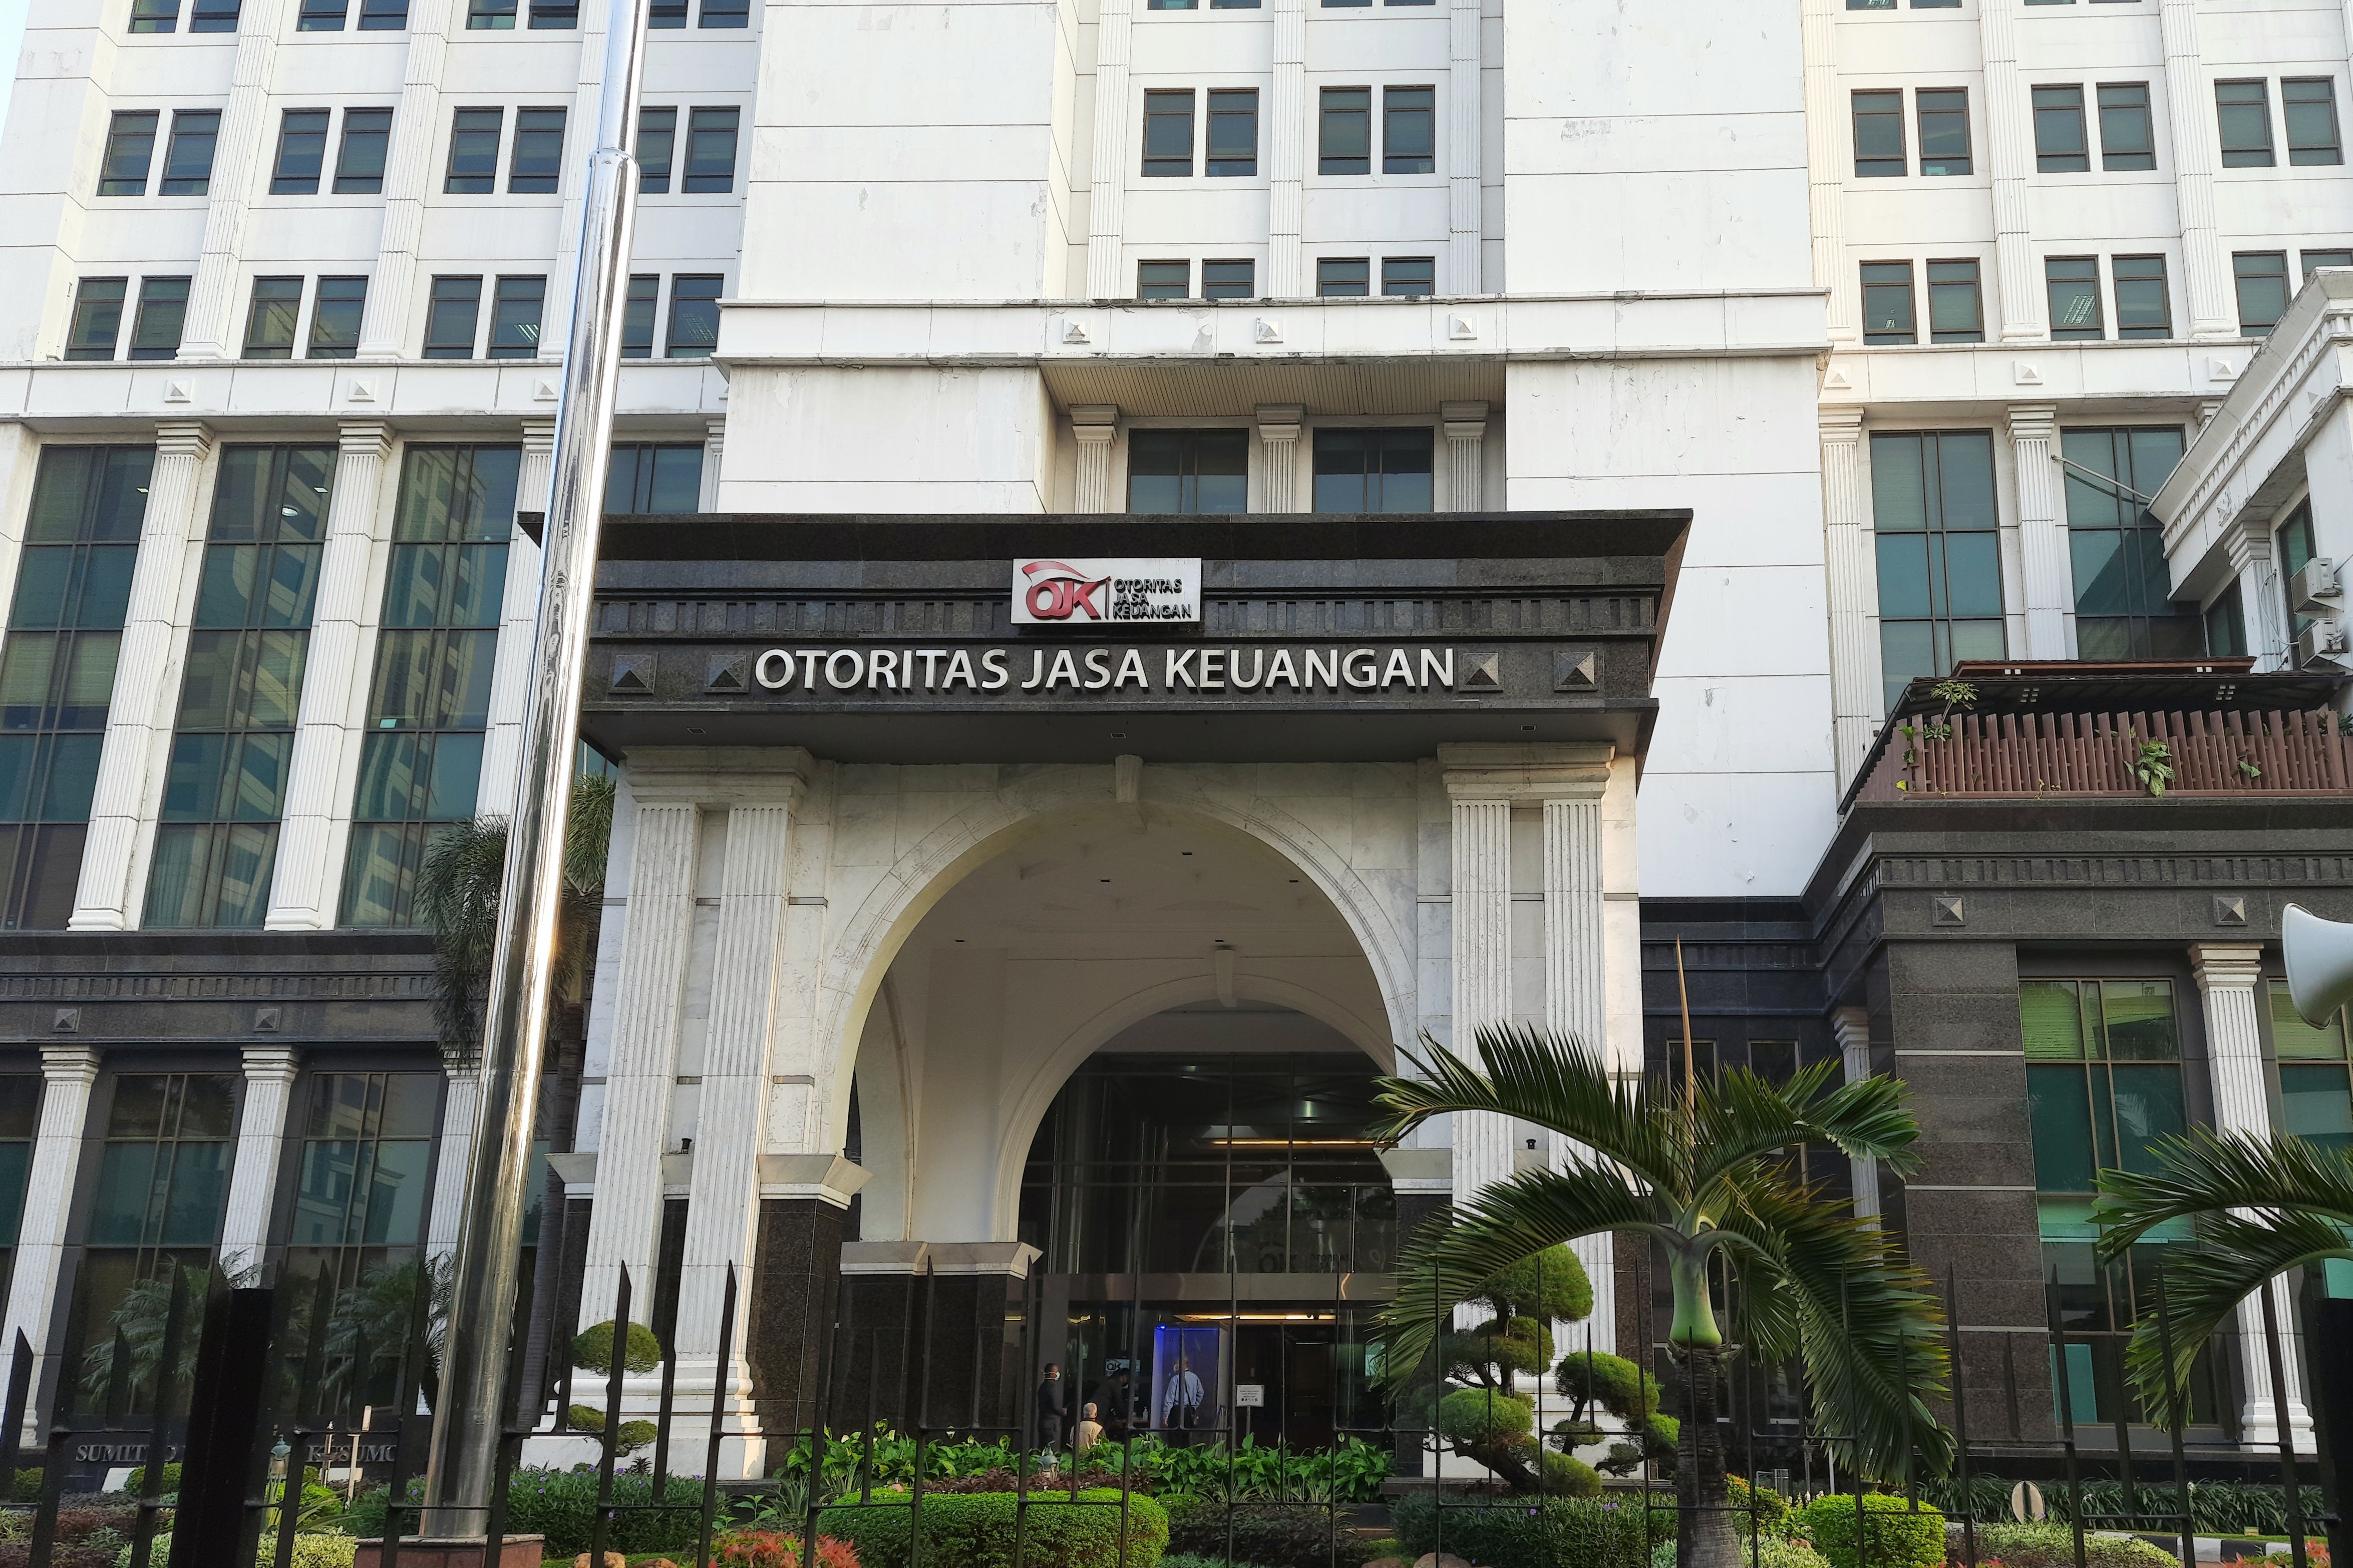 Jakarta, Indonesia, June 10, 2020. The Central Office of the Financial Services Authority (OJK) of the Republic of Indonesia. Image by haryanta.p / Shutterstock. Indonesia, 2020.